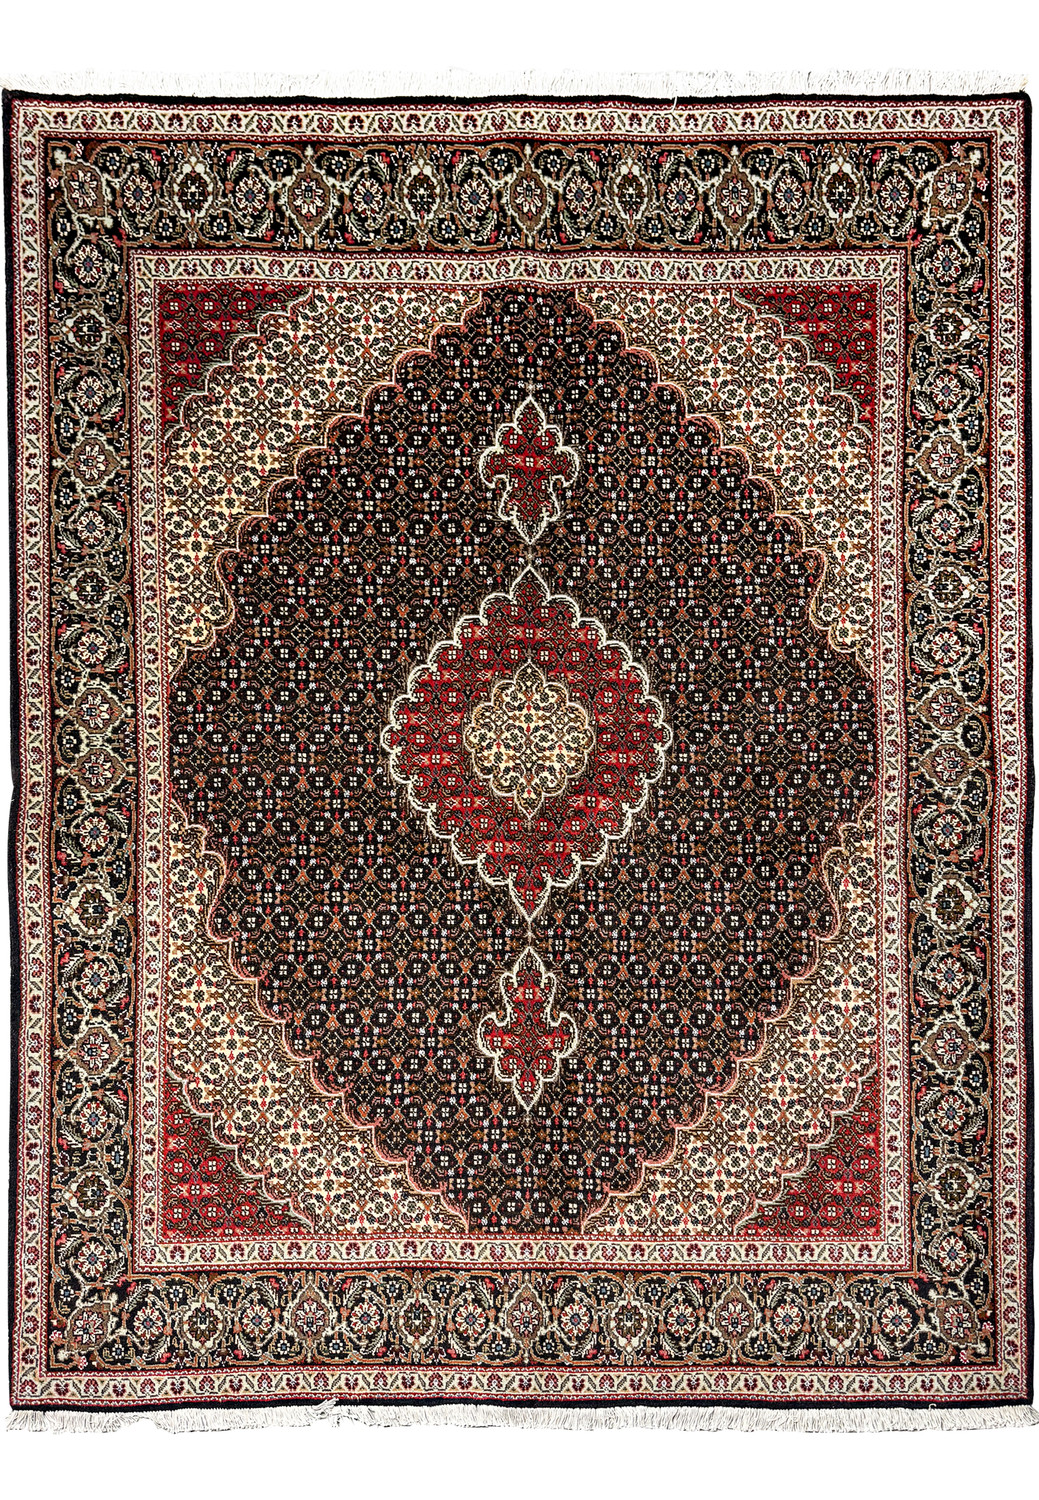 "Persian Tabriz Mahi rug edge detailing, showcasing the fine weave and complex designs in beige, red, and navy on a dark background.